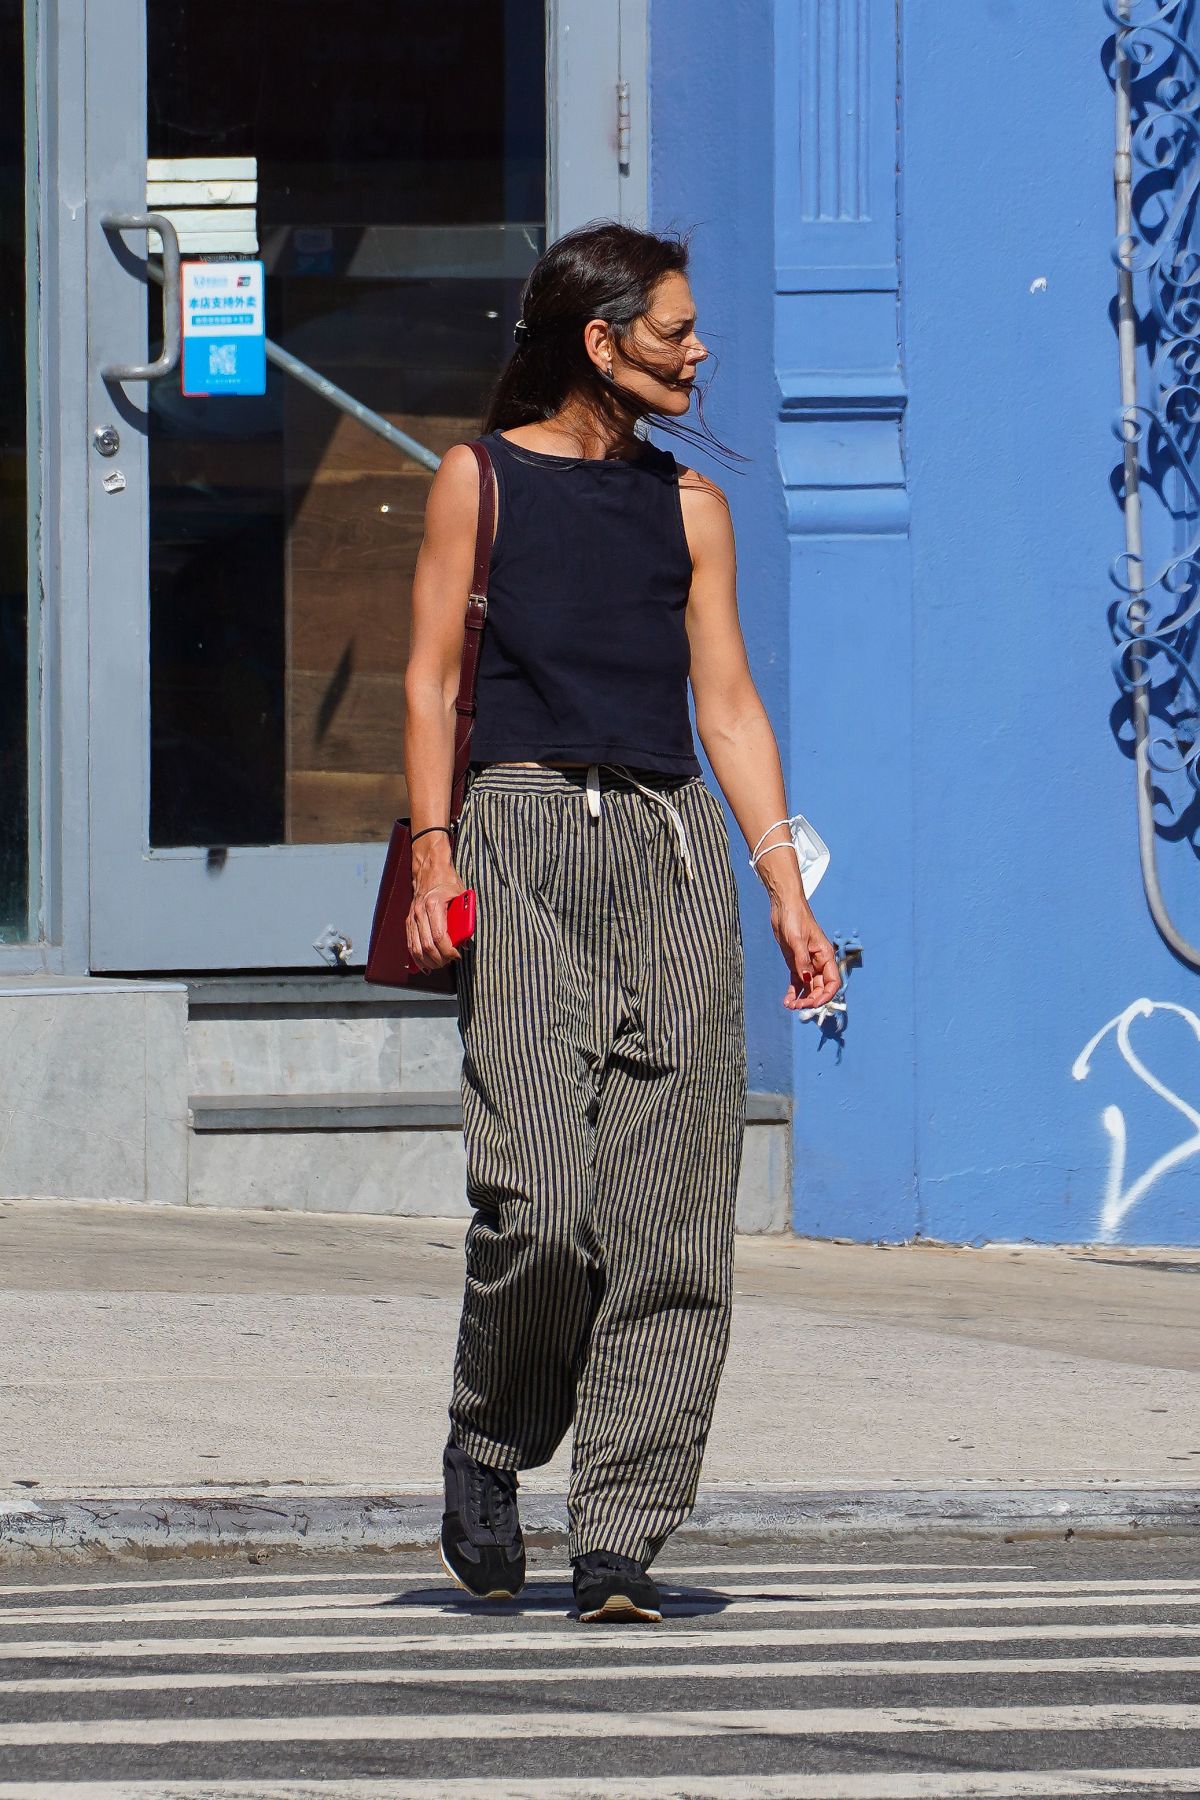 KATIE HOLMES Out Chatting on Her Phone in New York 08/30/2022.